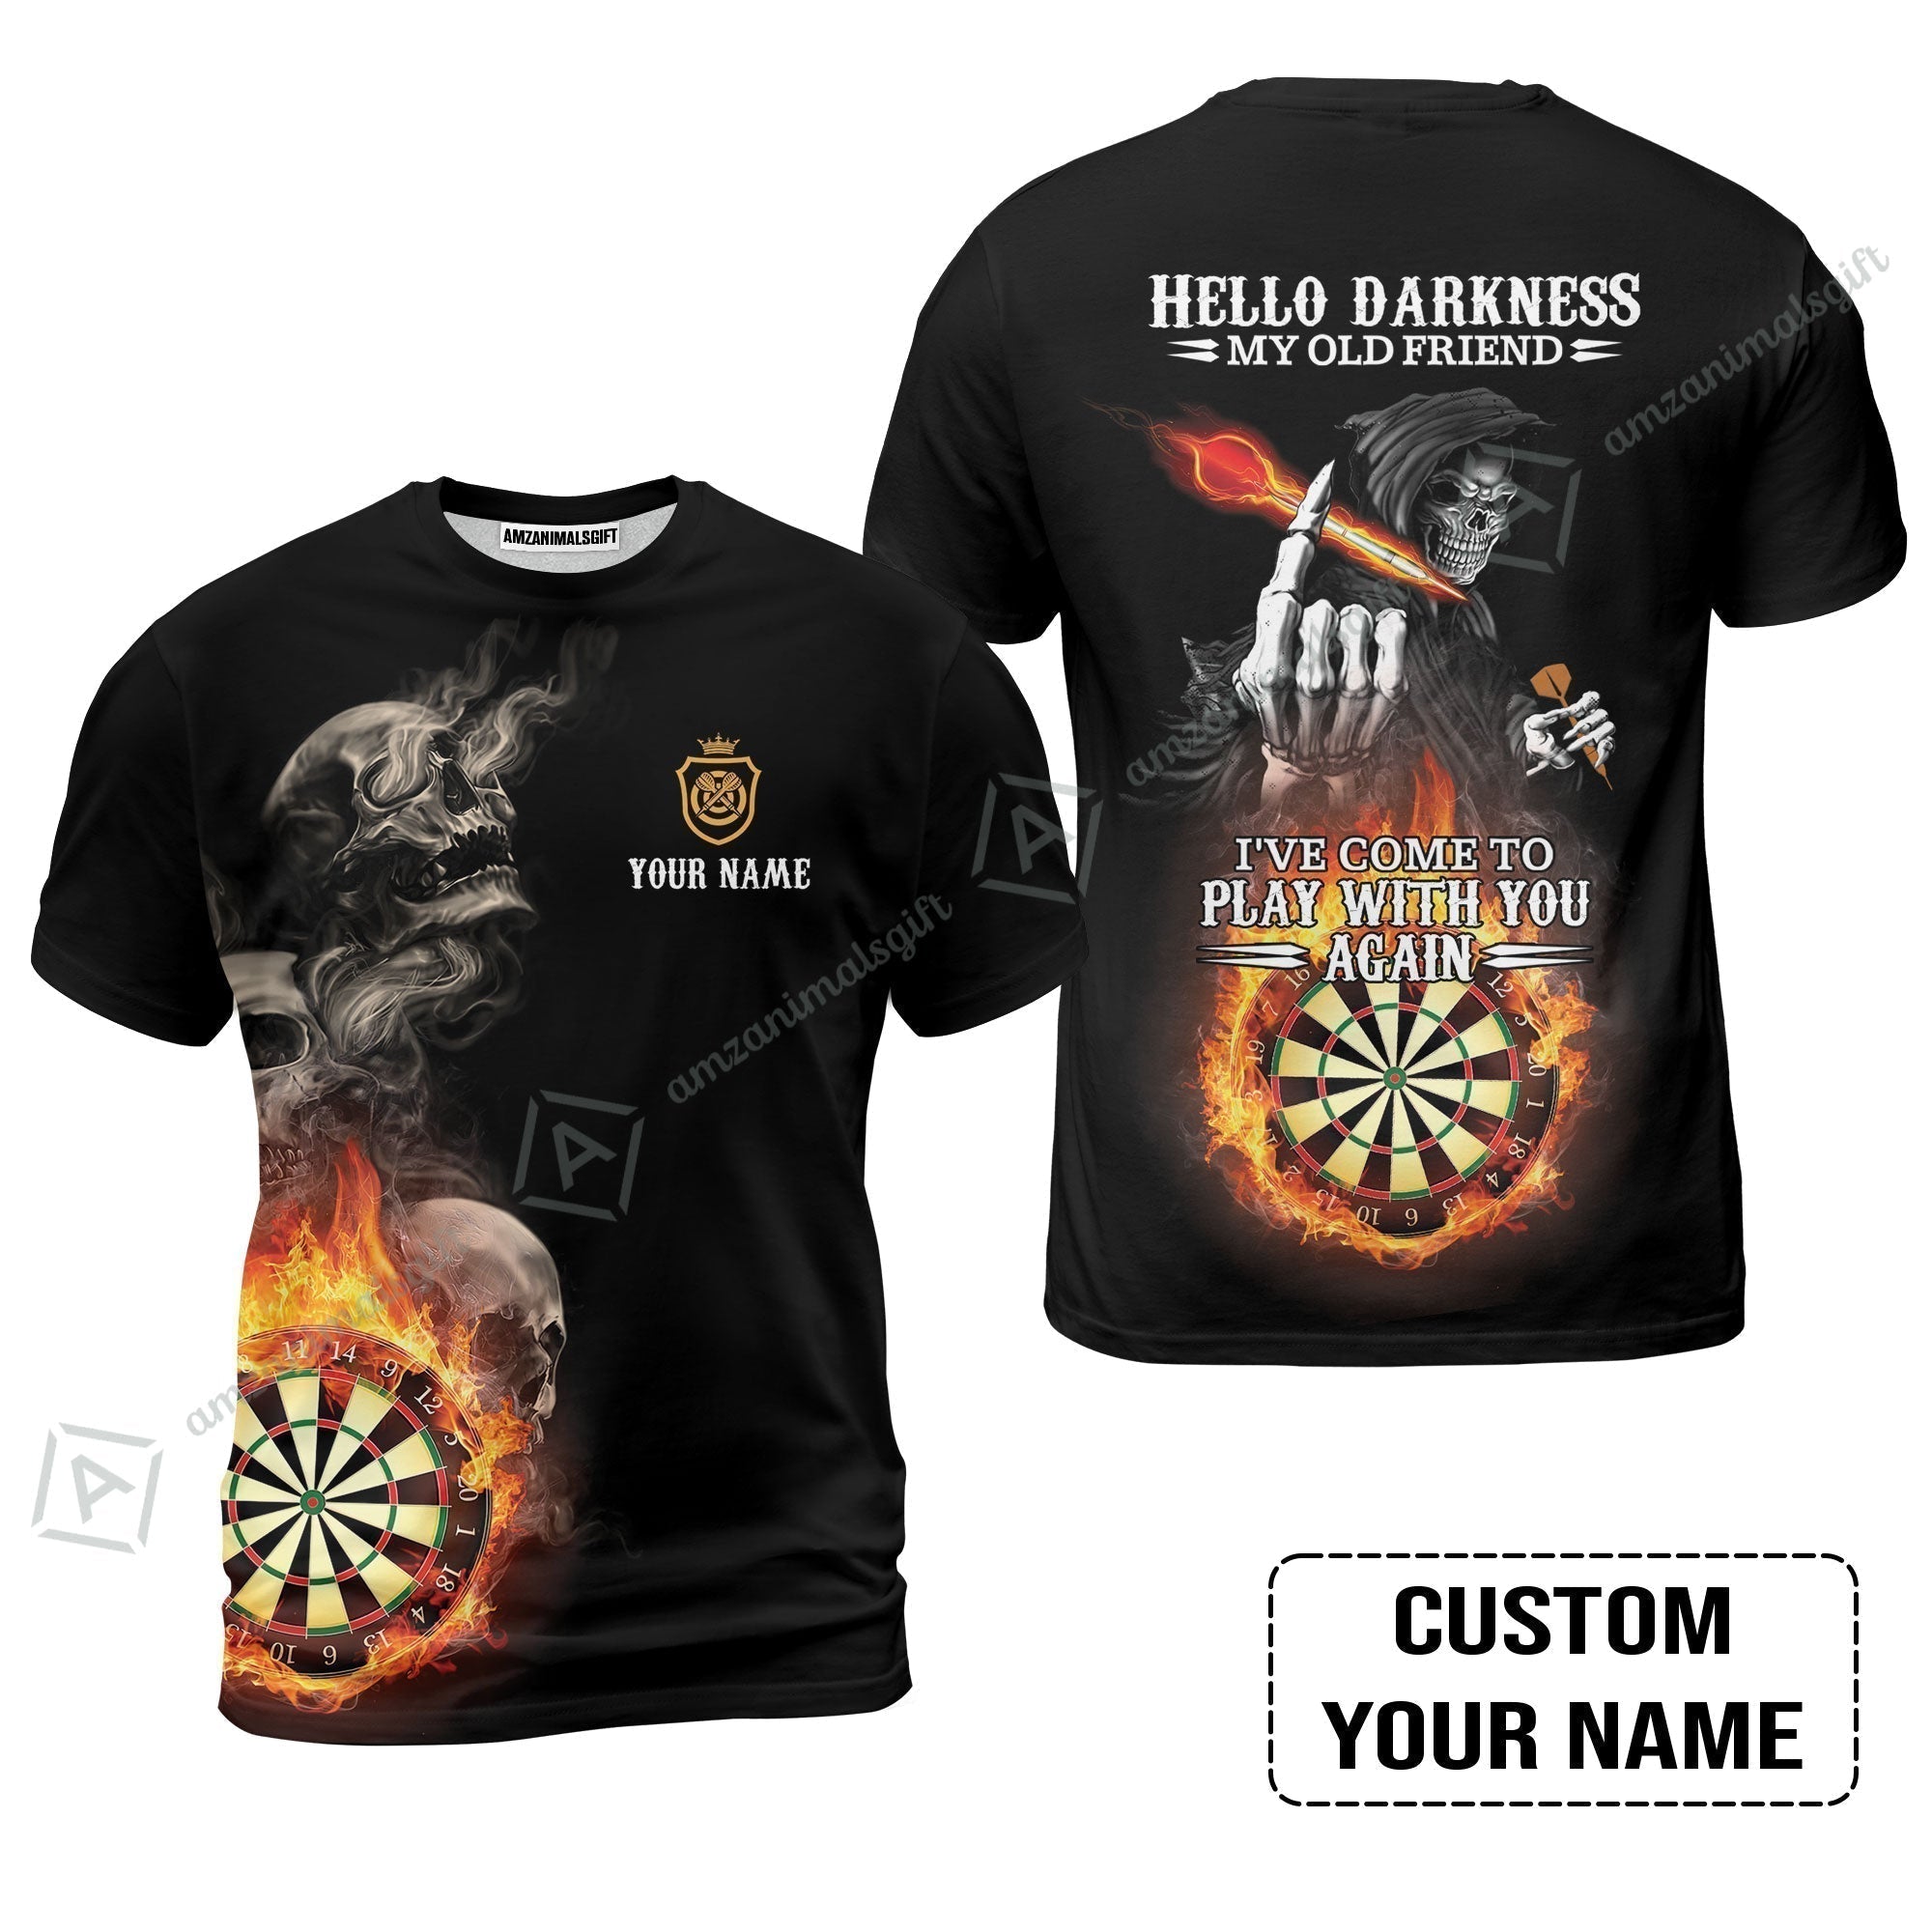 Darts Custom Name T-Shirt, Skull Personalized T-Shirt, Hello Darkness My Old Friend I've Come To Play With You Again